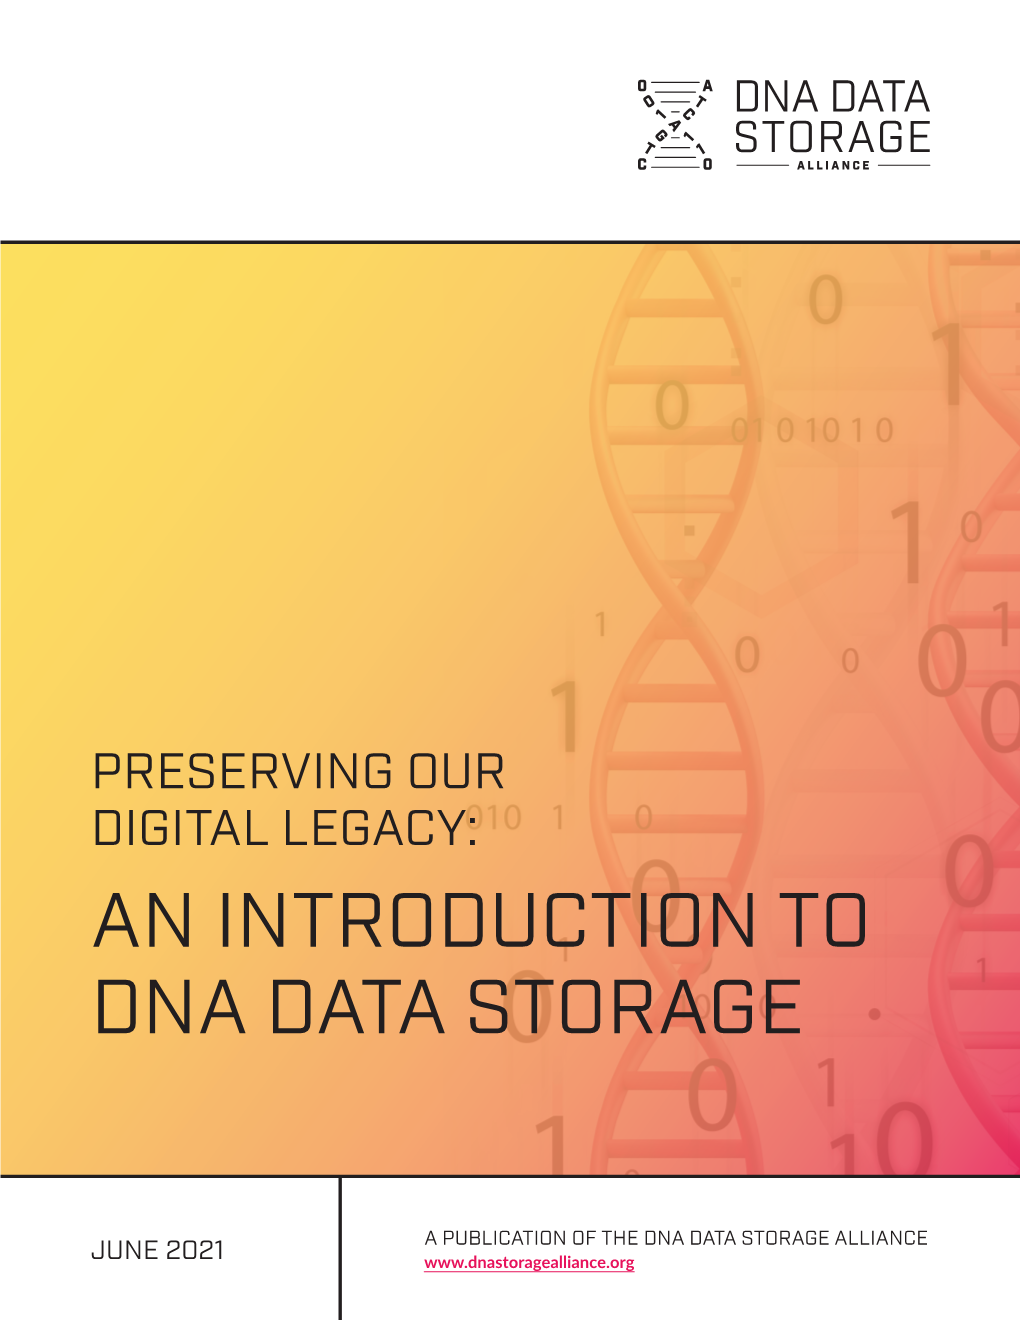 An Introduction to Dna Data Storage